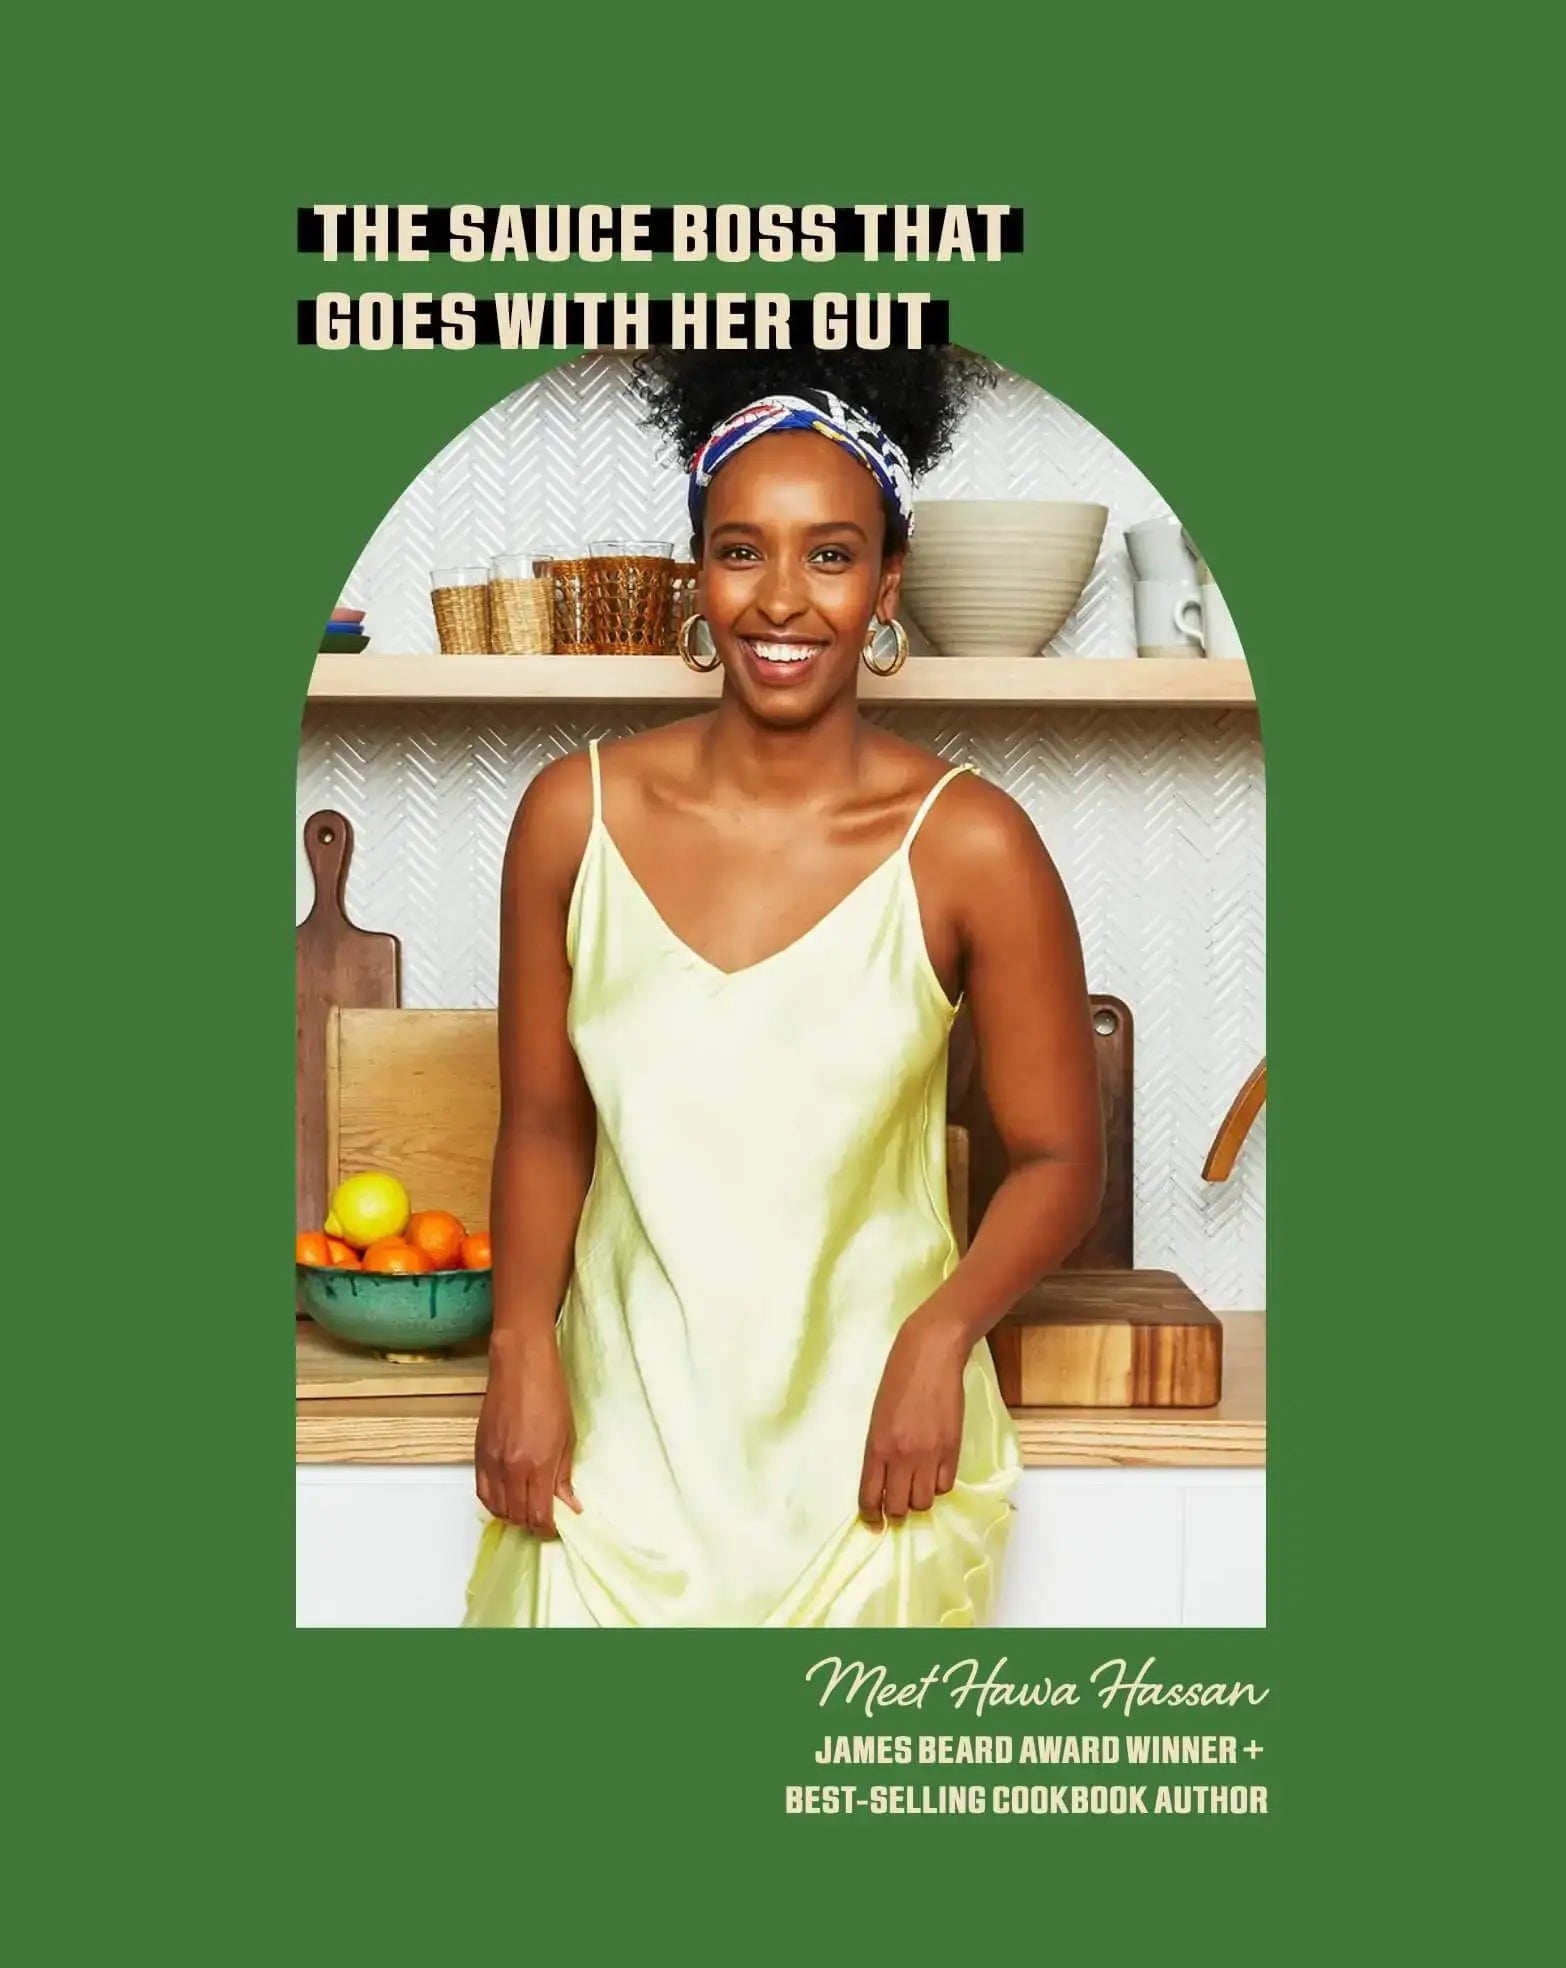 Meet Hawa Hassan: The Sauce Boss that Goes with Her Gut, James Beard Award Winner, and Best-Selling Cookbook Author